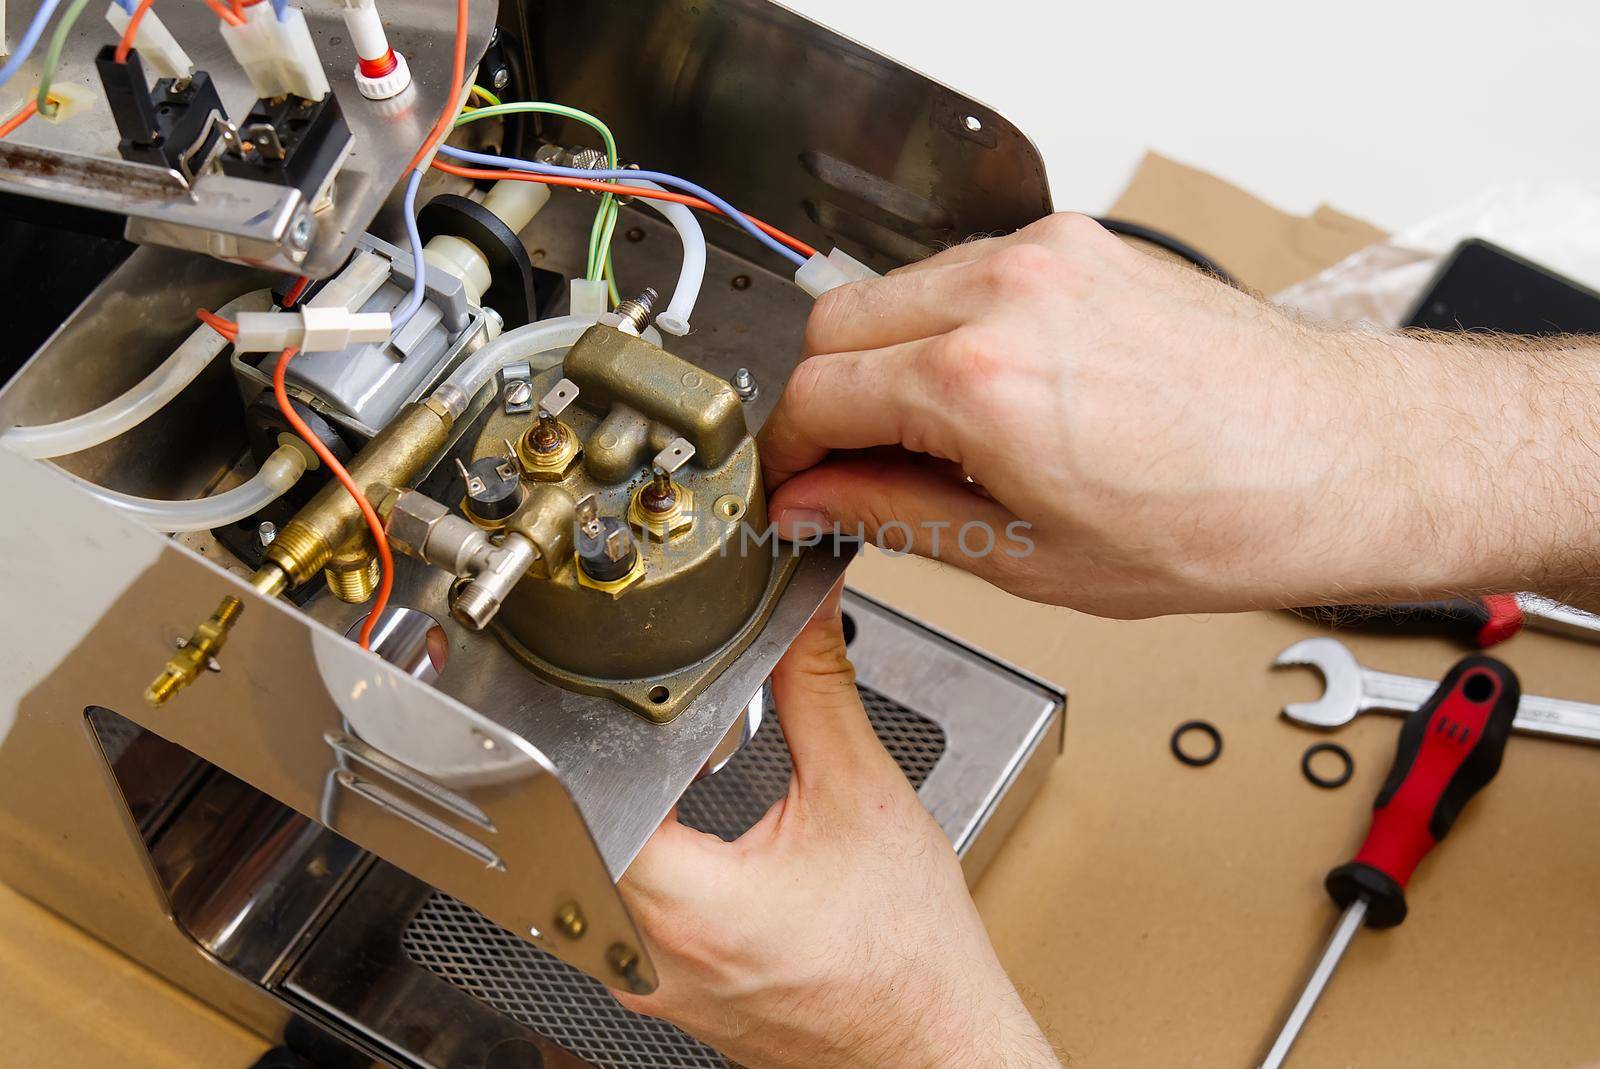 Repair of coffee machine at home. Spare parts for the espresso machine. Repair of kitchen appliances service concept